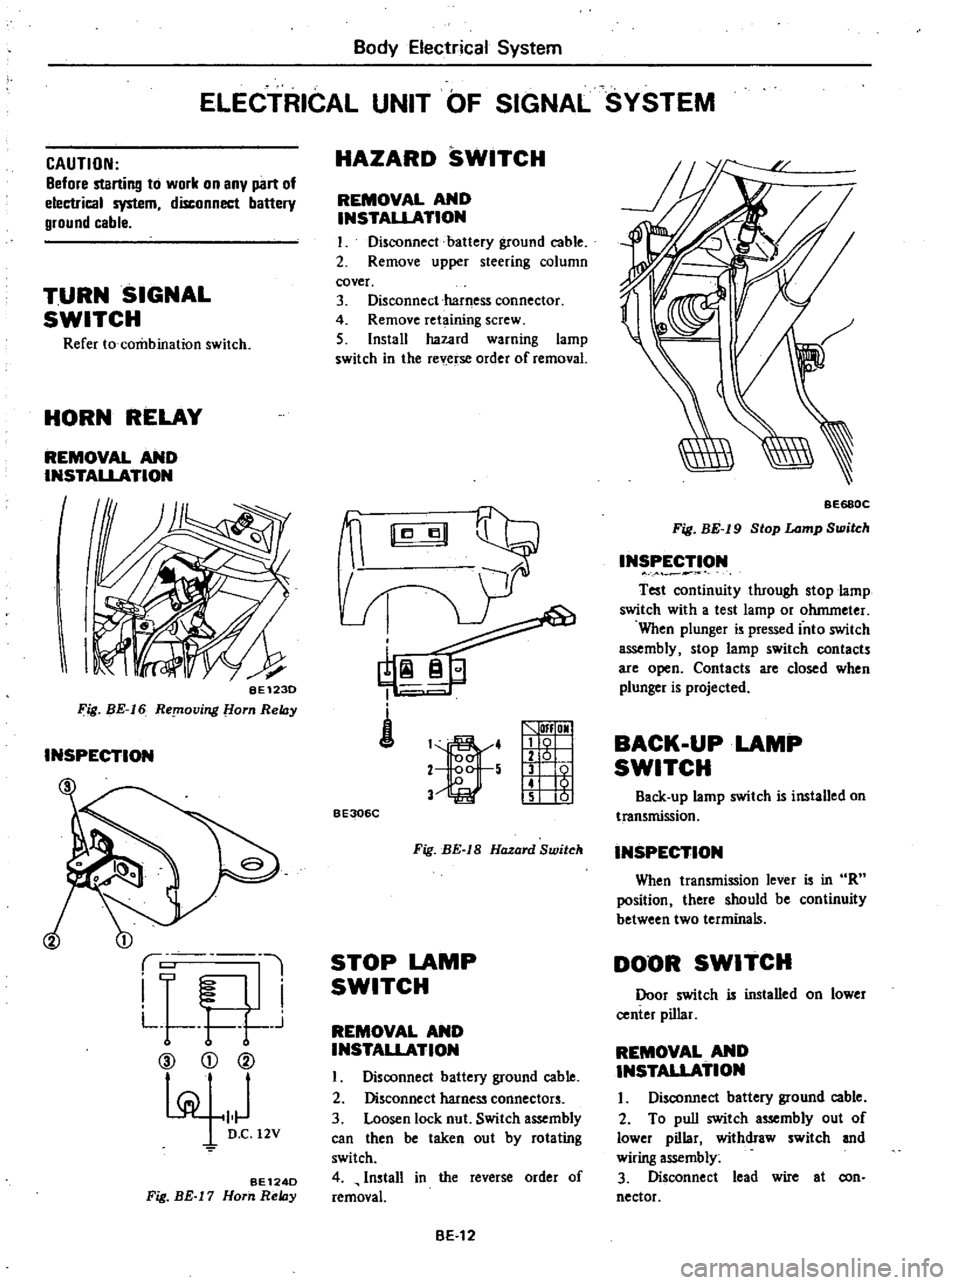 DATSUN 210 1979  Service Manual 
Body 
Electrical

System

ELECTRICAL 
UNIT 
OF 
SIGNAL 
SYSTEM

CAUTION

Before

startill1l 
to 
work 
on

any

part 
of

electrical

system 
disconnect

battery

ground 
cable

TURN 
SIGNAL

SWITCH
